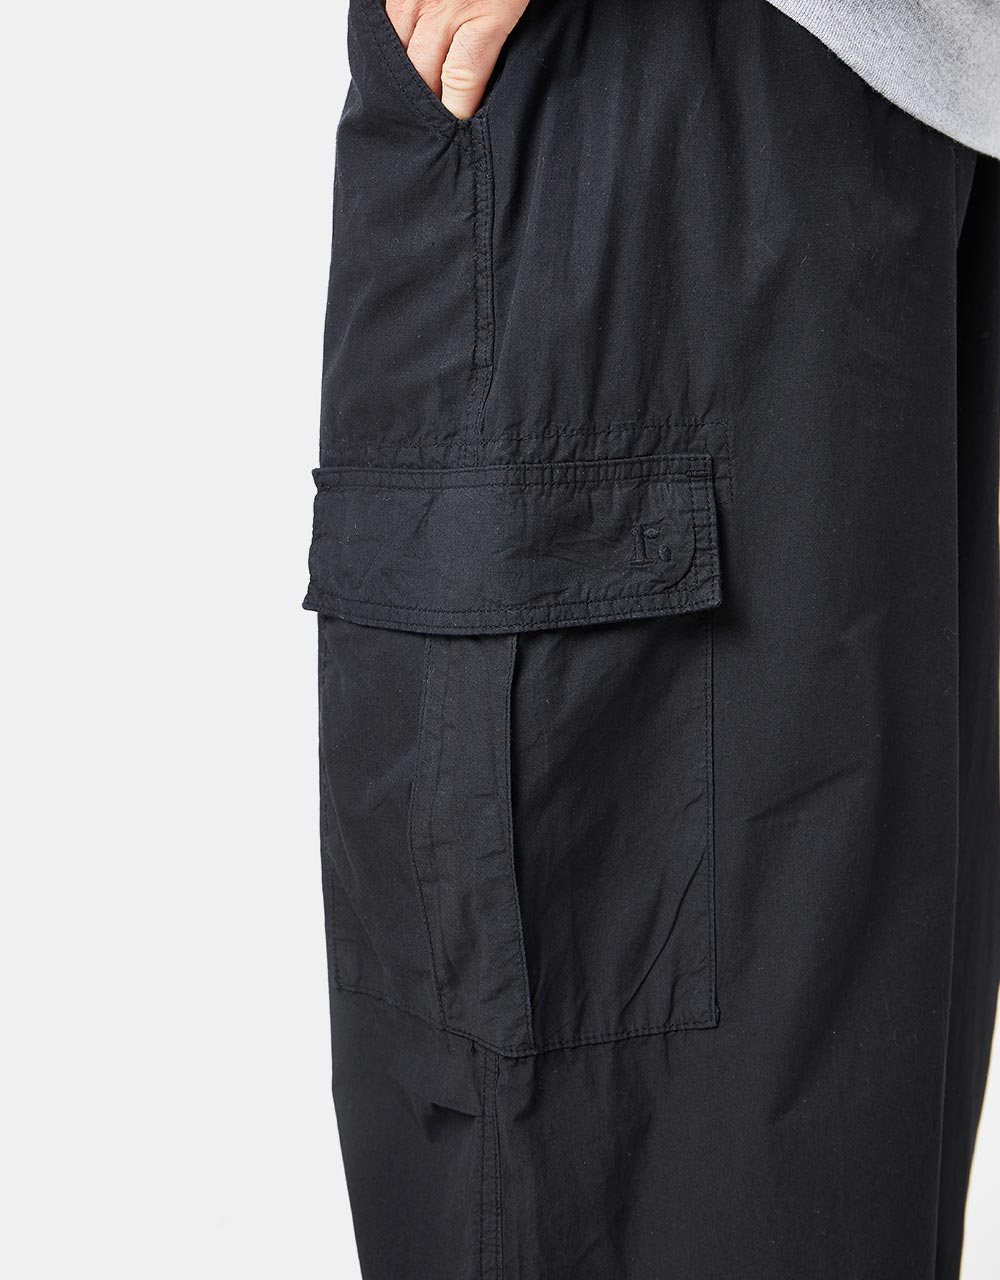 Route One Super Baggy Cargo Pant - Black